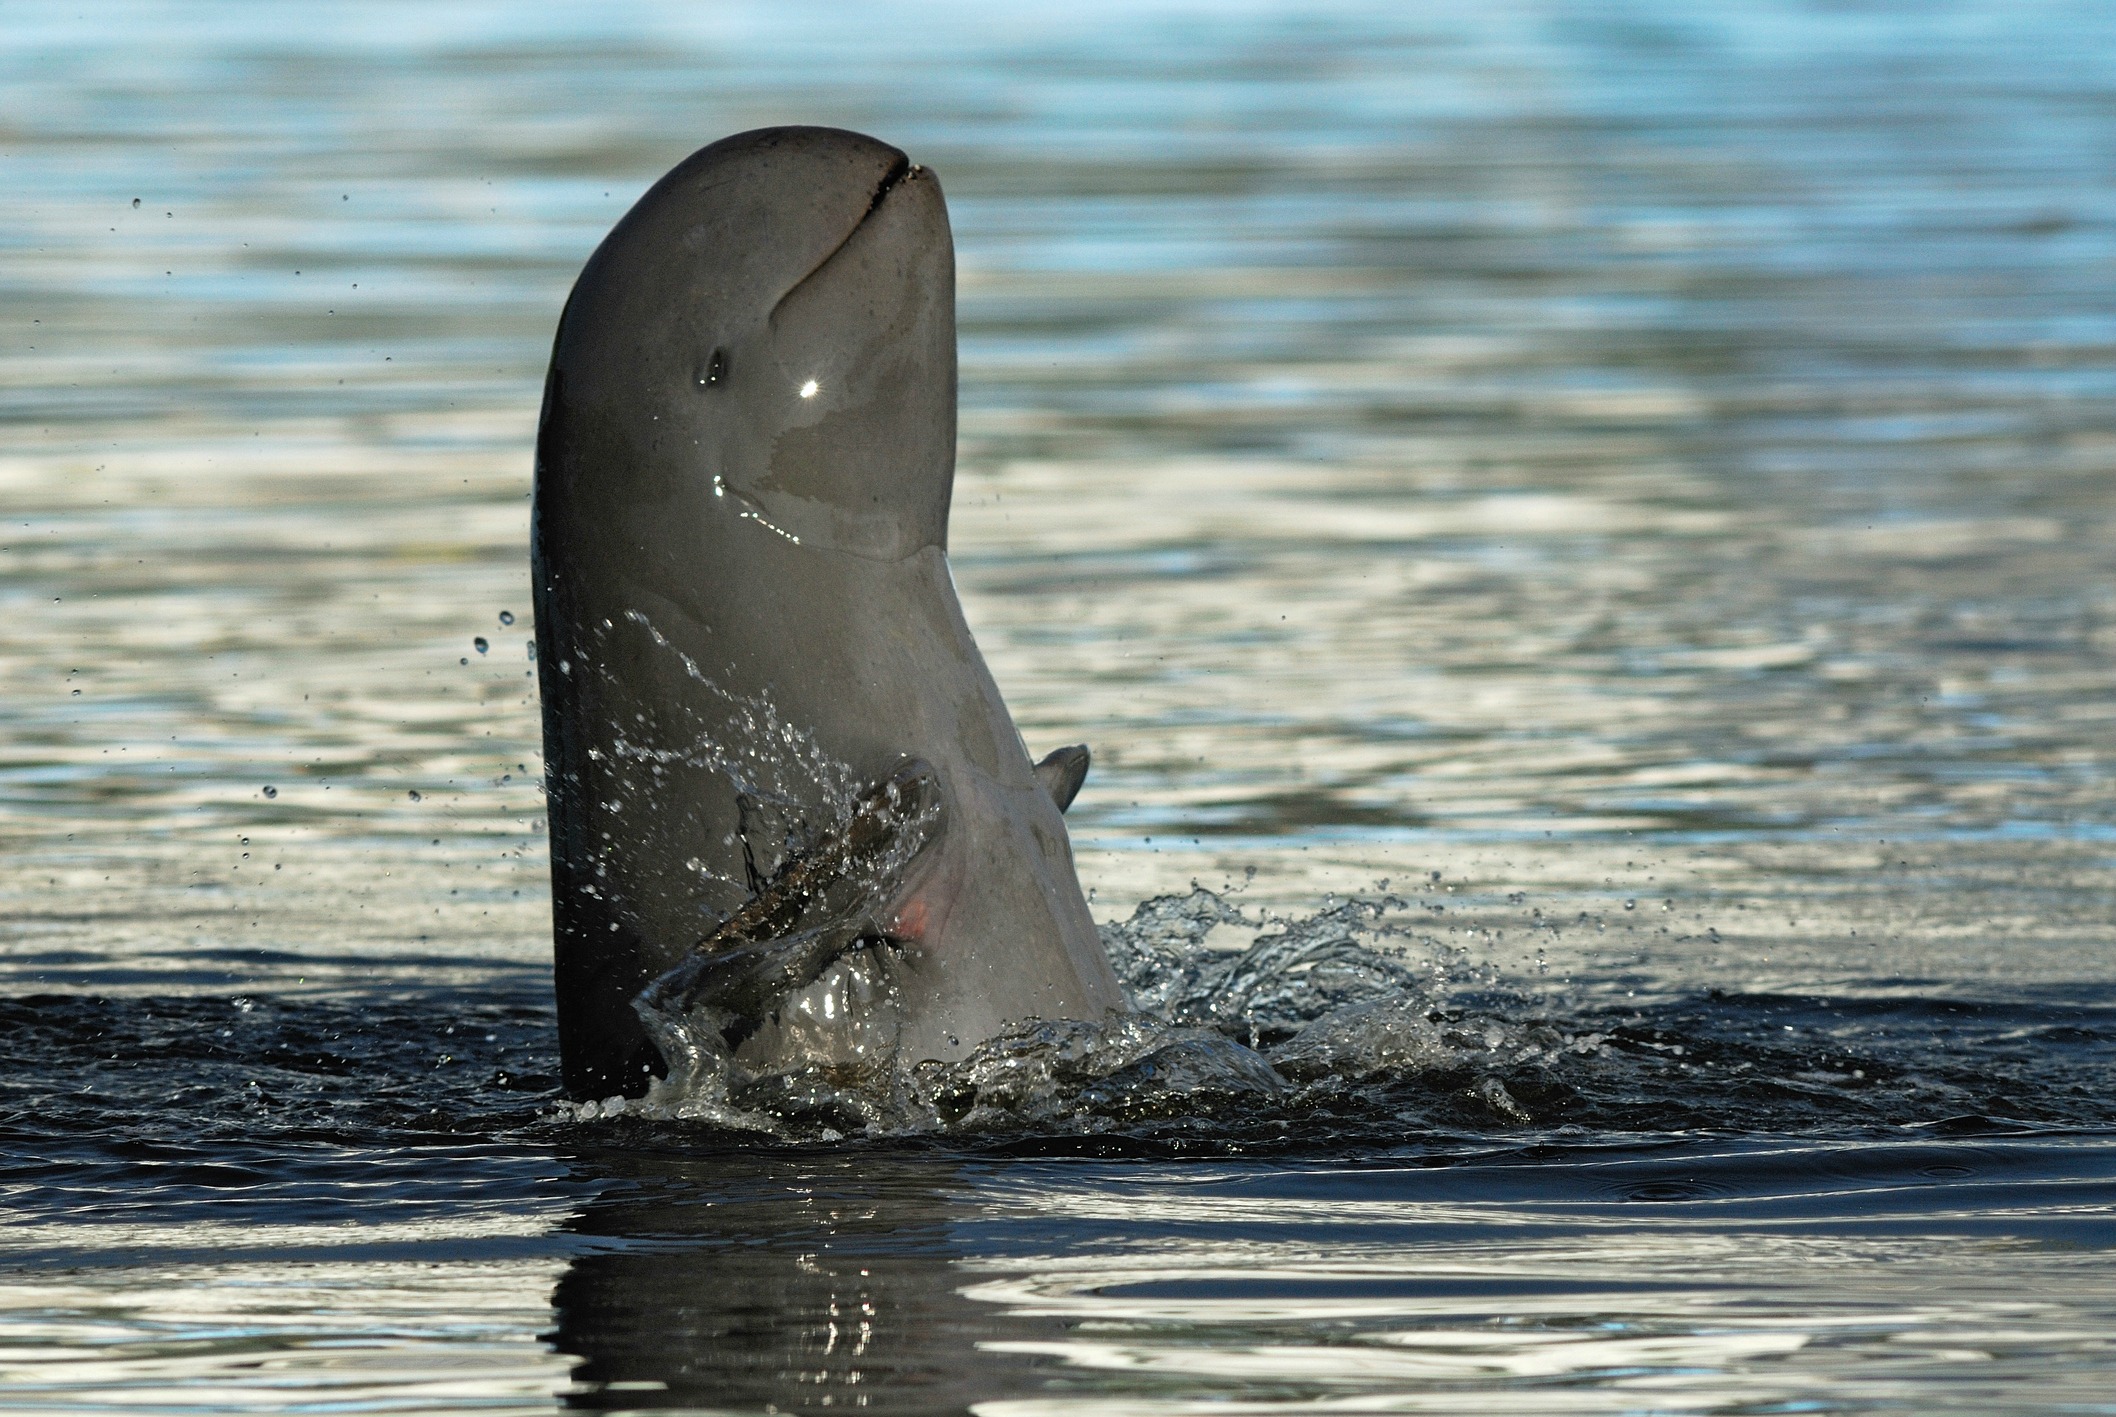 A picture of the Irrawaddy dolphin in the Mekong River in Laos